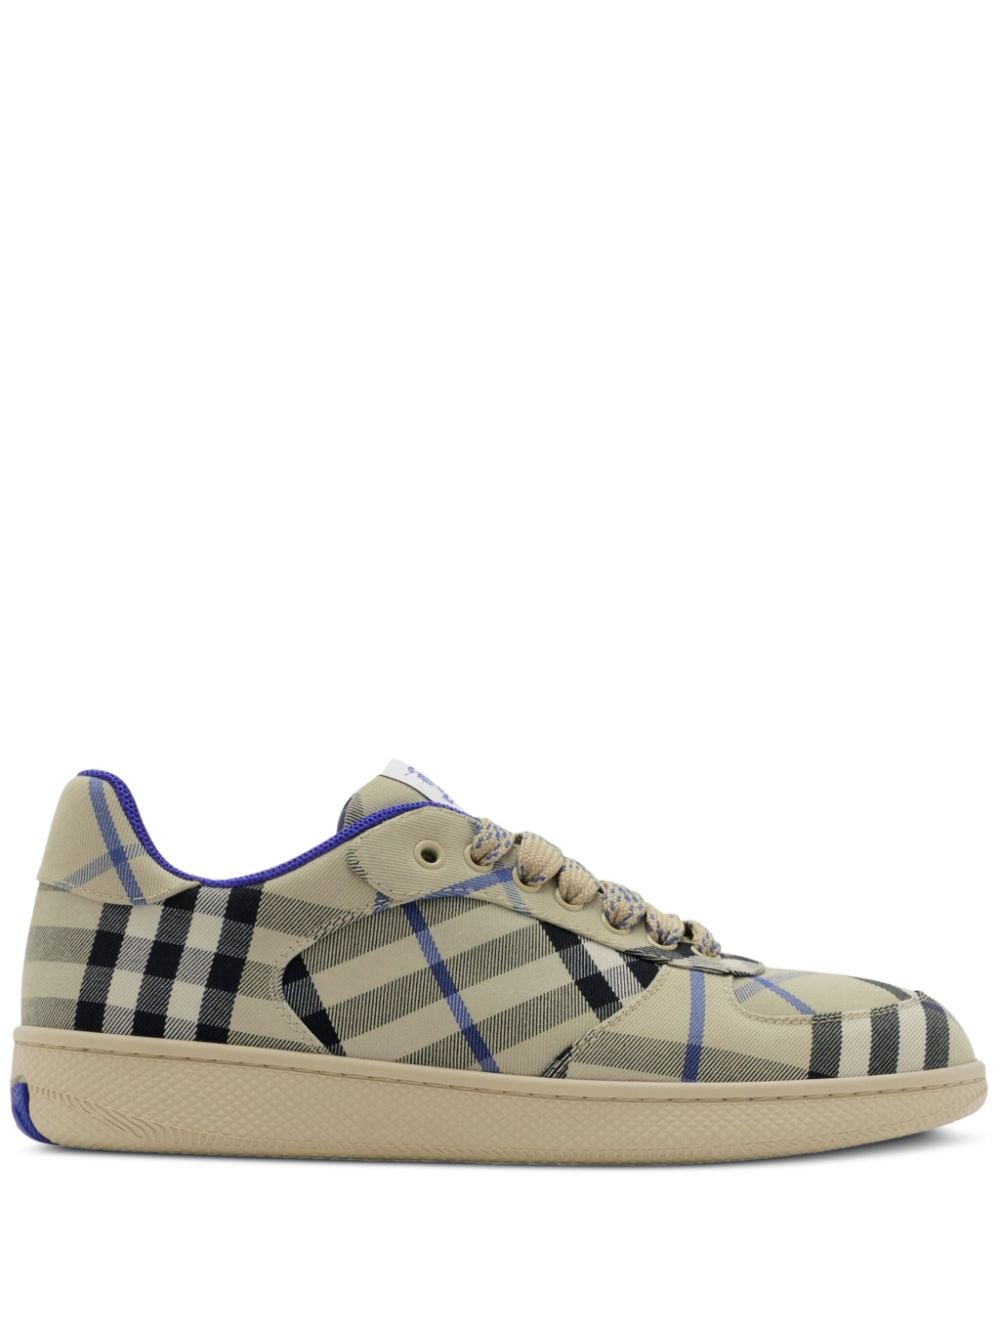 Burberry Terrace checked sneakers - Neutrals von Burberry